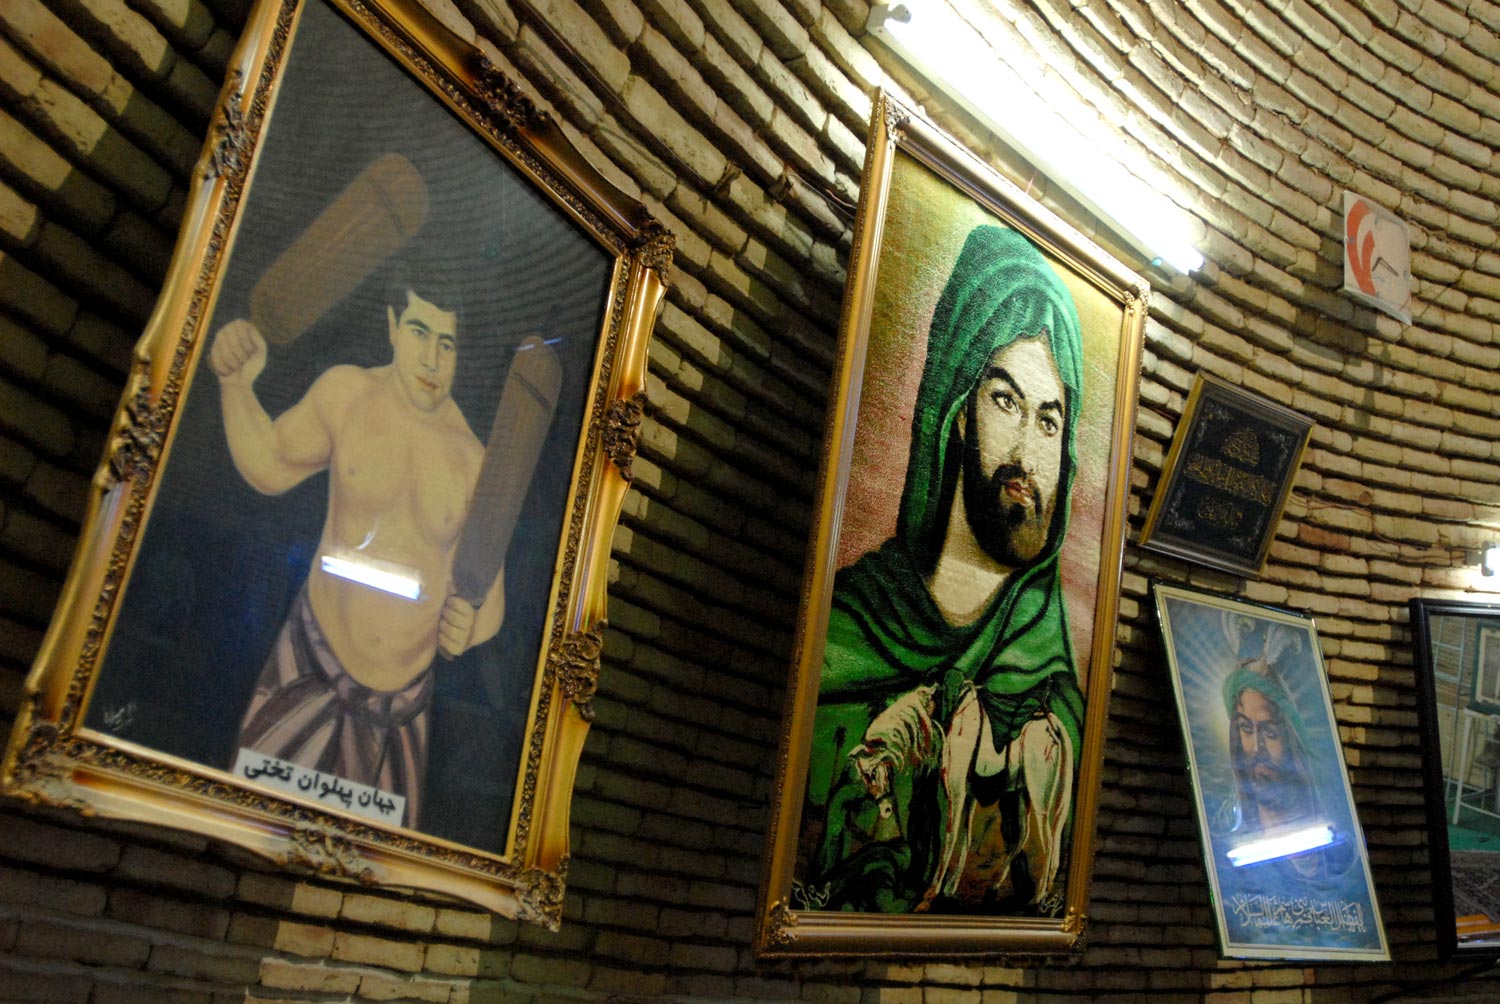 (Figure 14.7b, p. 370): Portraits of Ghulamreza Takhtii (left) and Imams ‘Ali (center) and Hussein (right)